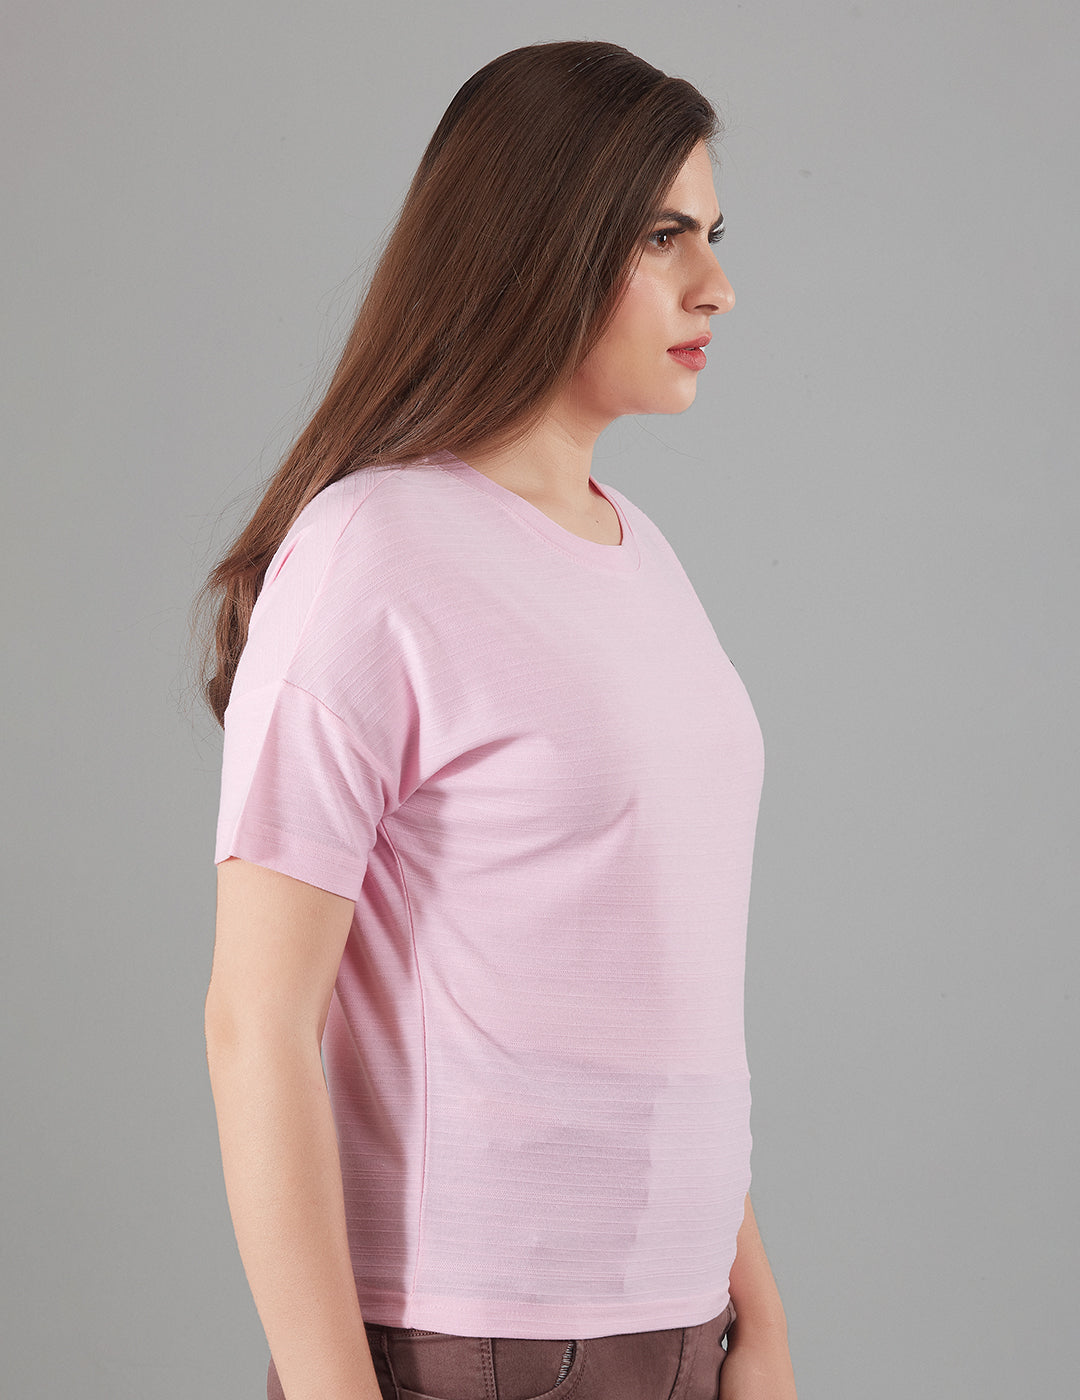 Stylish Plain Short T-Shirts for women In pink At Best Price